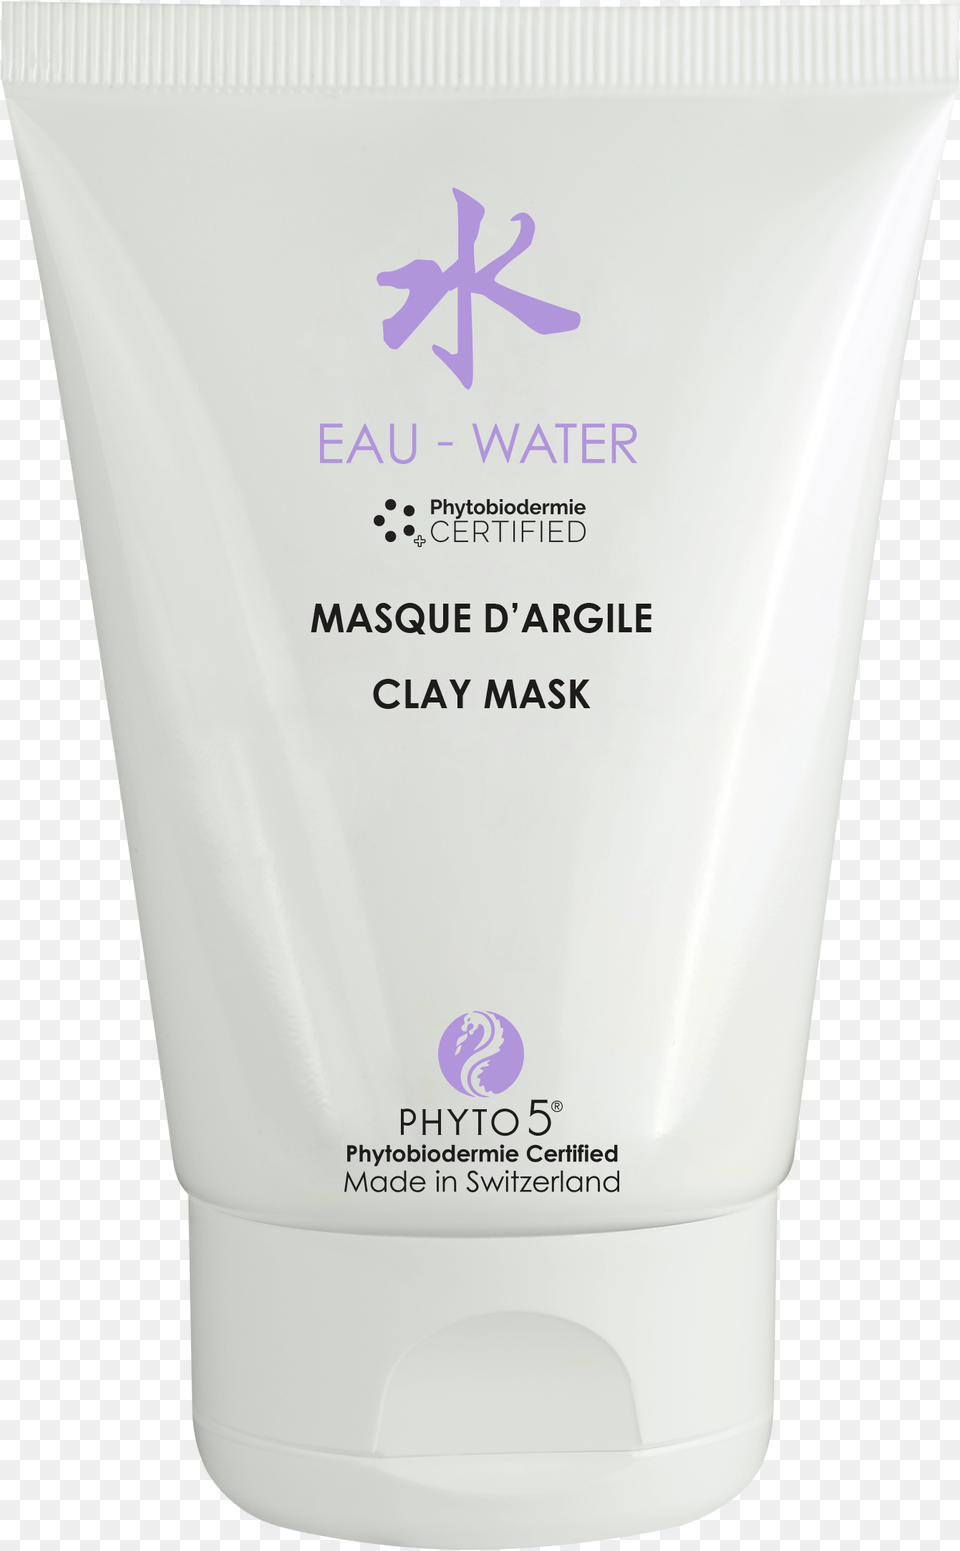 Metal White Clay Mask, Bottle, Lotion, Cosmetics, Sunscreen Png Image